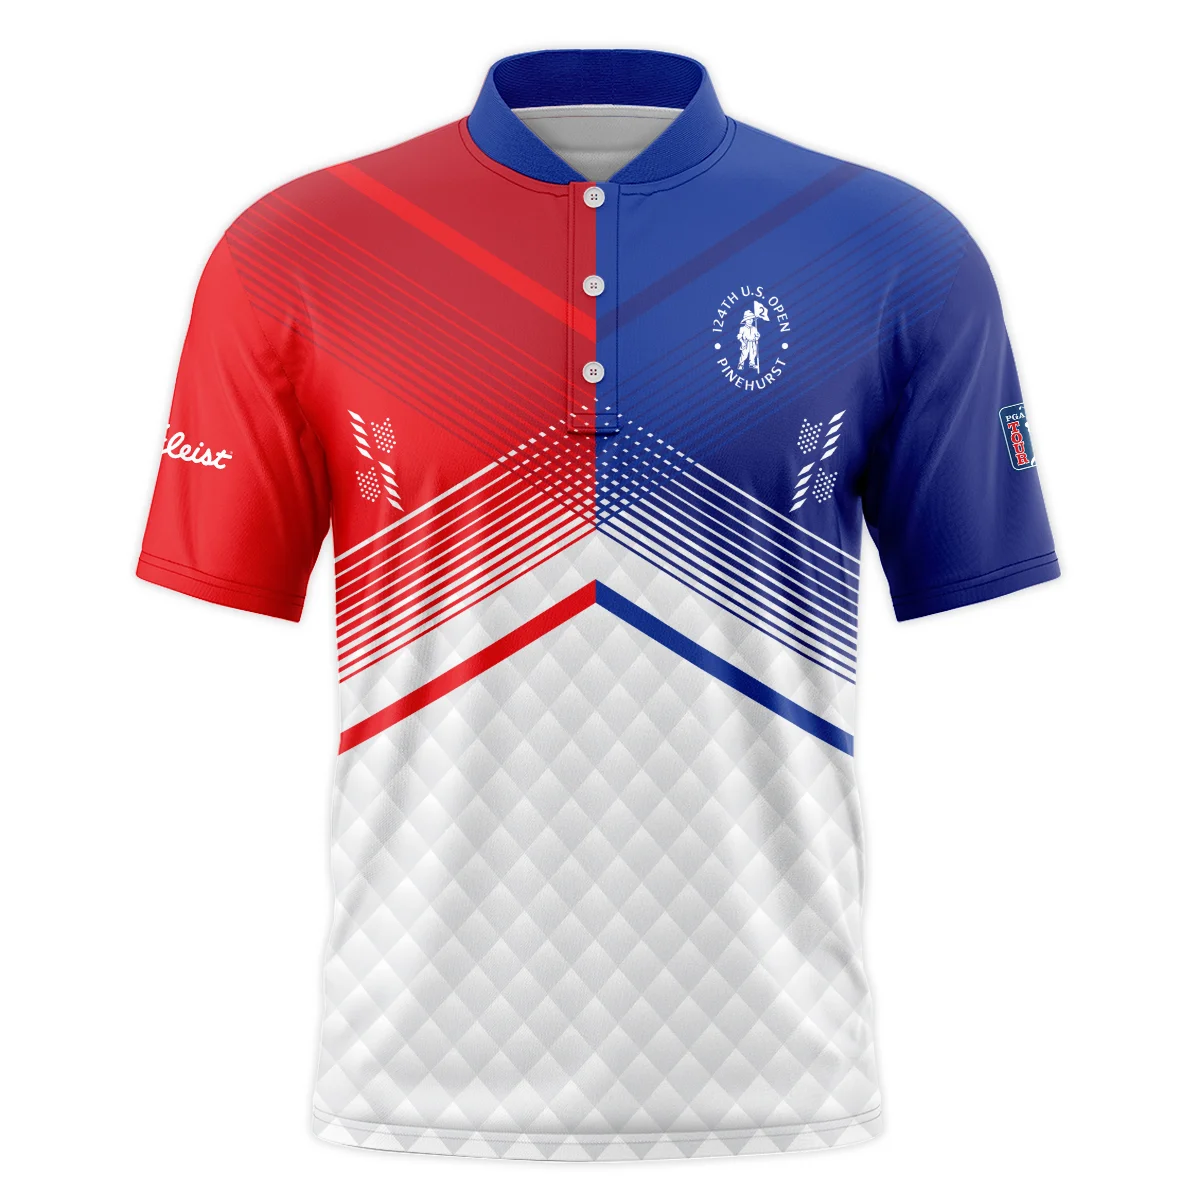 Titleist 124th U.S. Open Pinehurst Blue Red Line White Abstract Style Classic, Short Sleeve Round Neck Polo Shirt